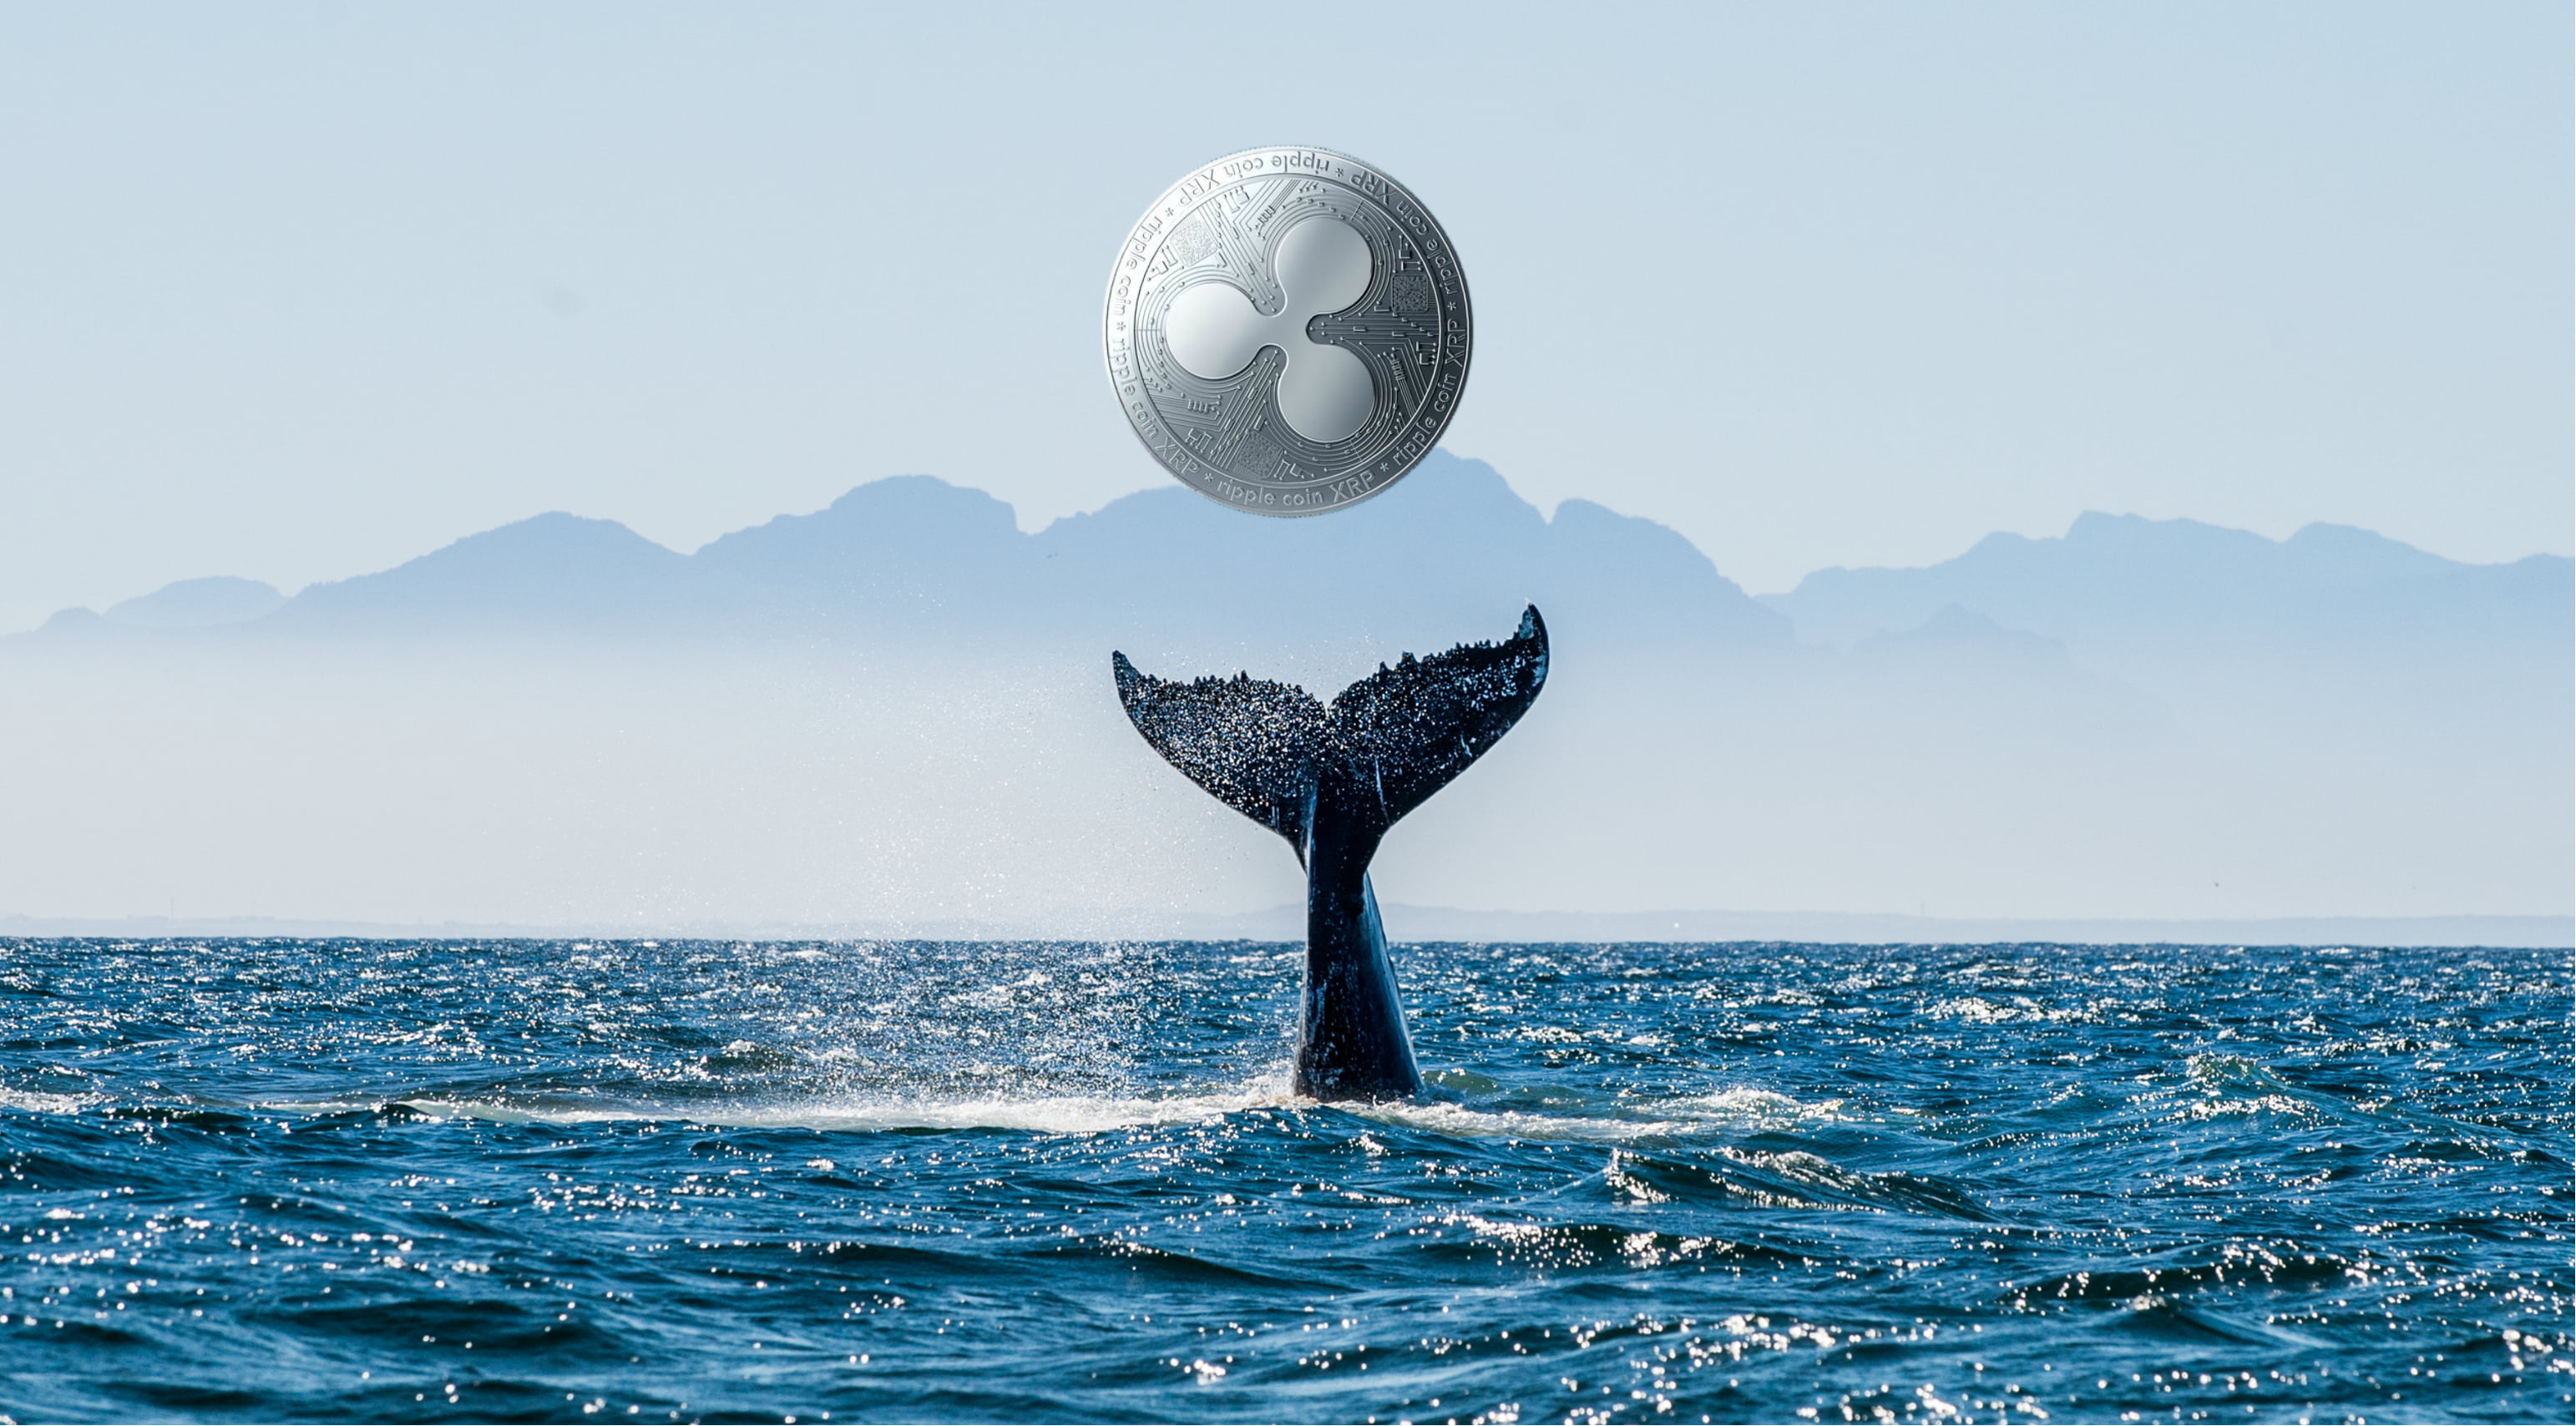 xrp ripple whale crypto